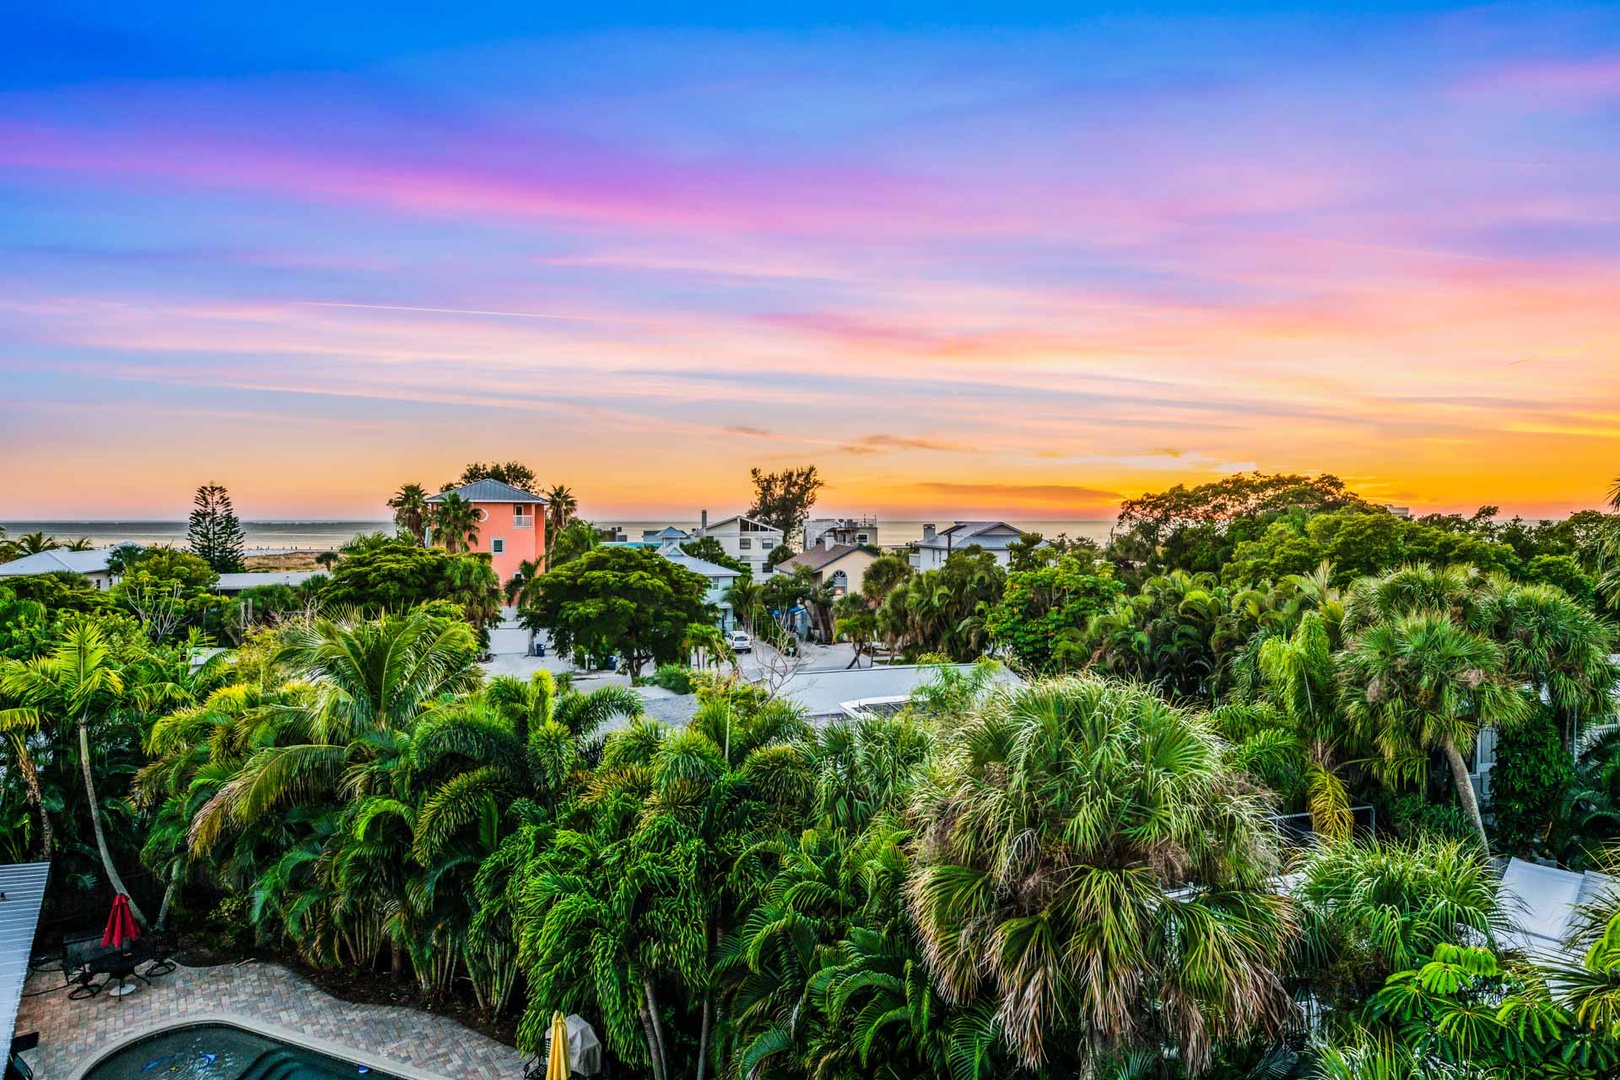 Take in the sunset from this amazing roof top deck